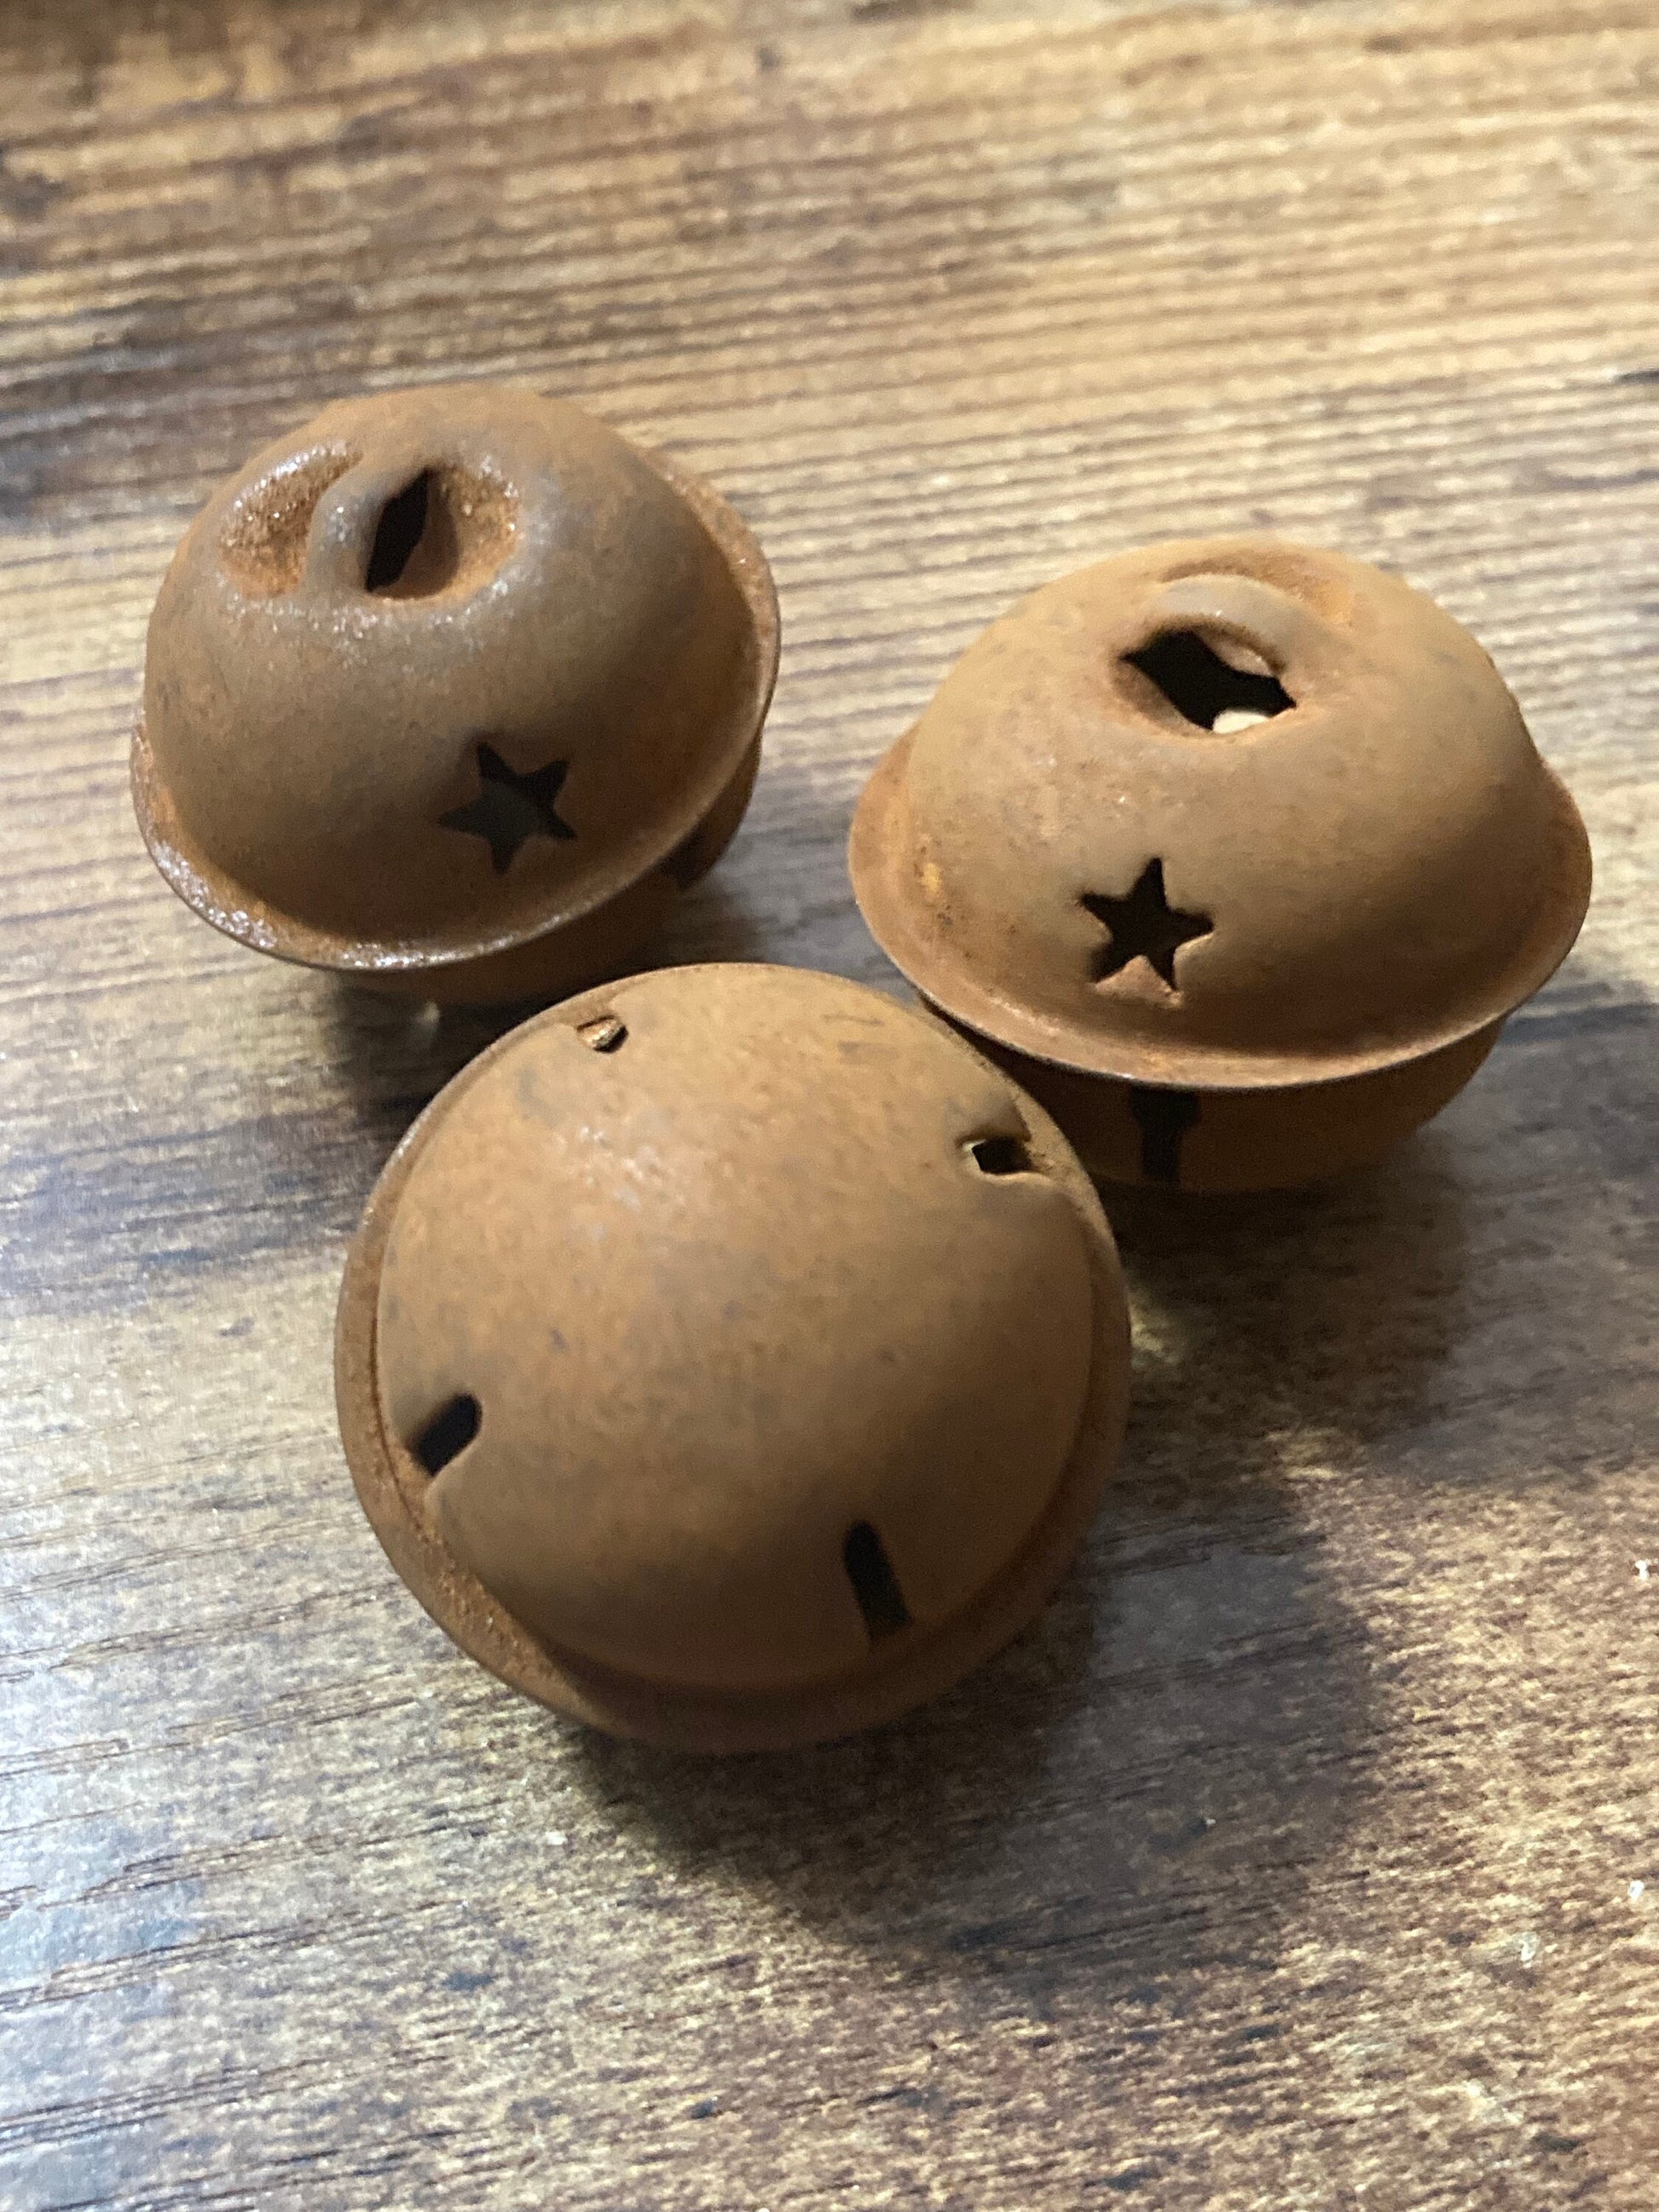 Rustic Metal Buttons - Large